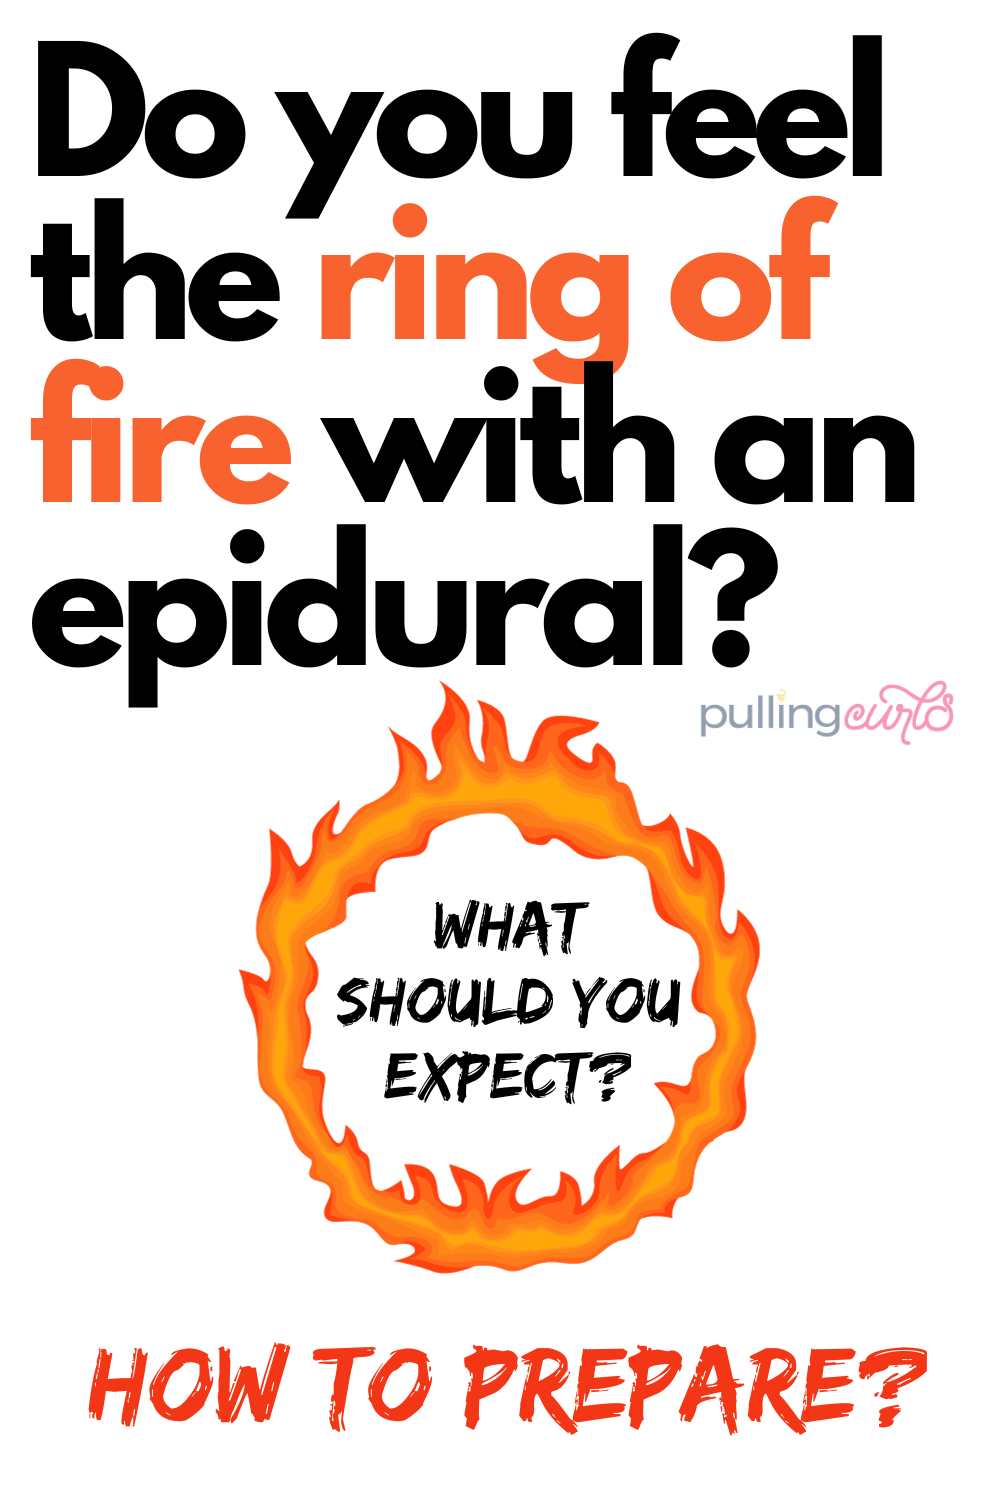 Ever heard of the terrifying 'ring of fire' during childbirth? Discover what it really means and whether you'll feel it if you opt for an epidural. Will the epidural be your saviour against this burning sensation? Let's dig into the matter! via @pullingcurls